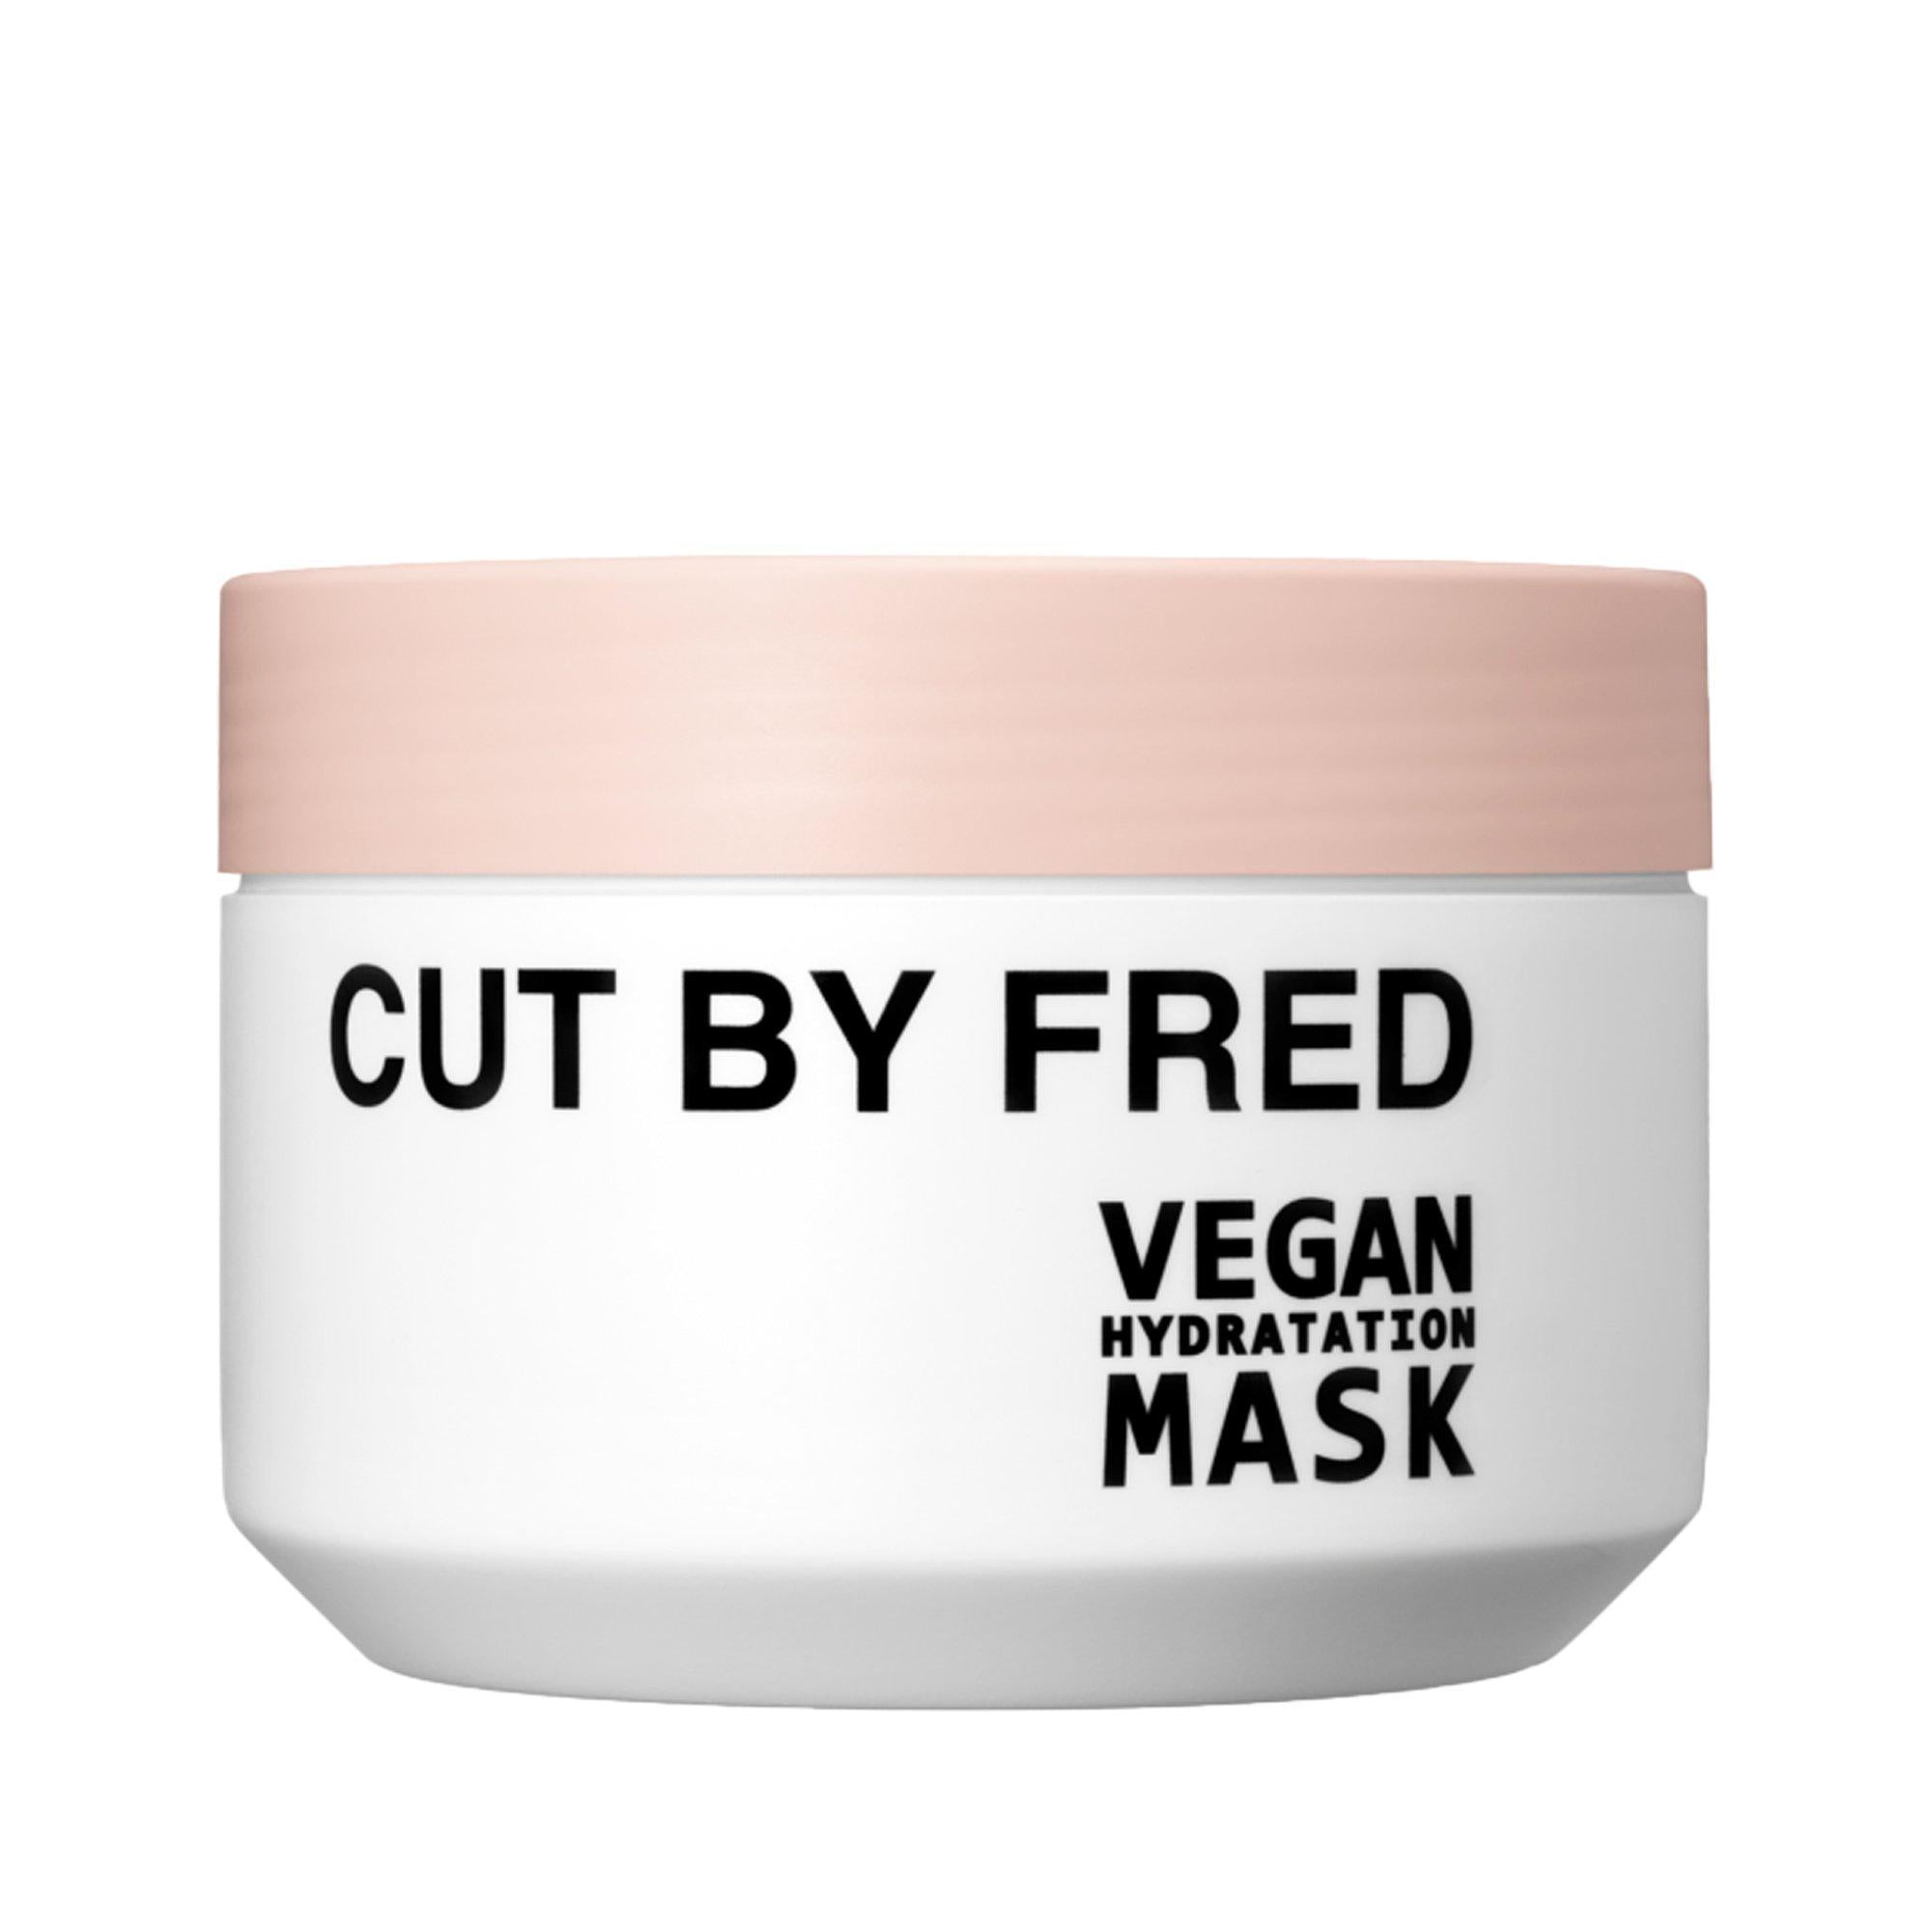 Masque Hydratant Vegan Masque Hydratant Vegan - Cut By Fred